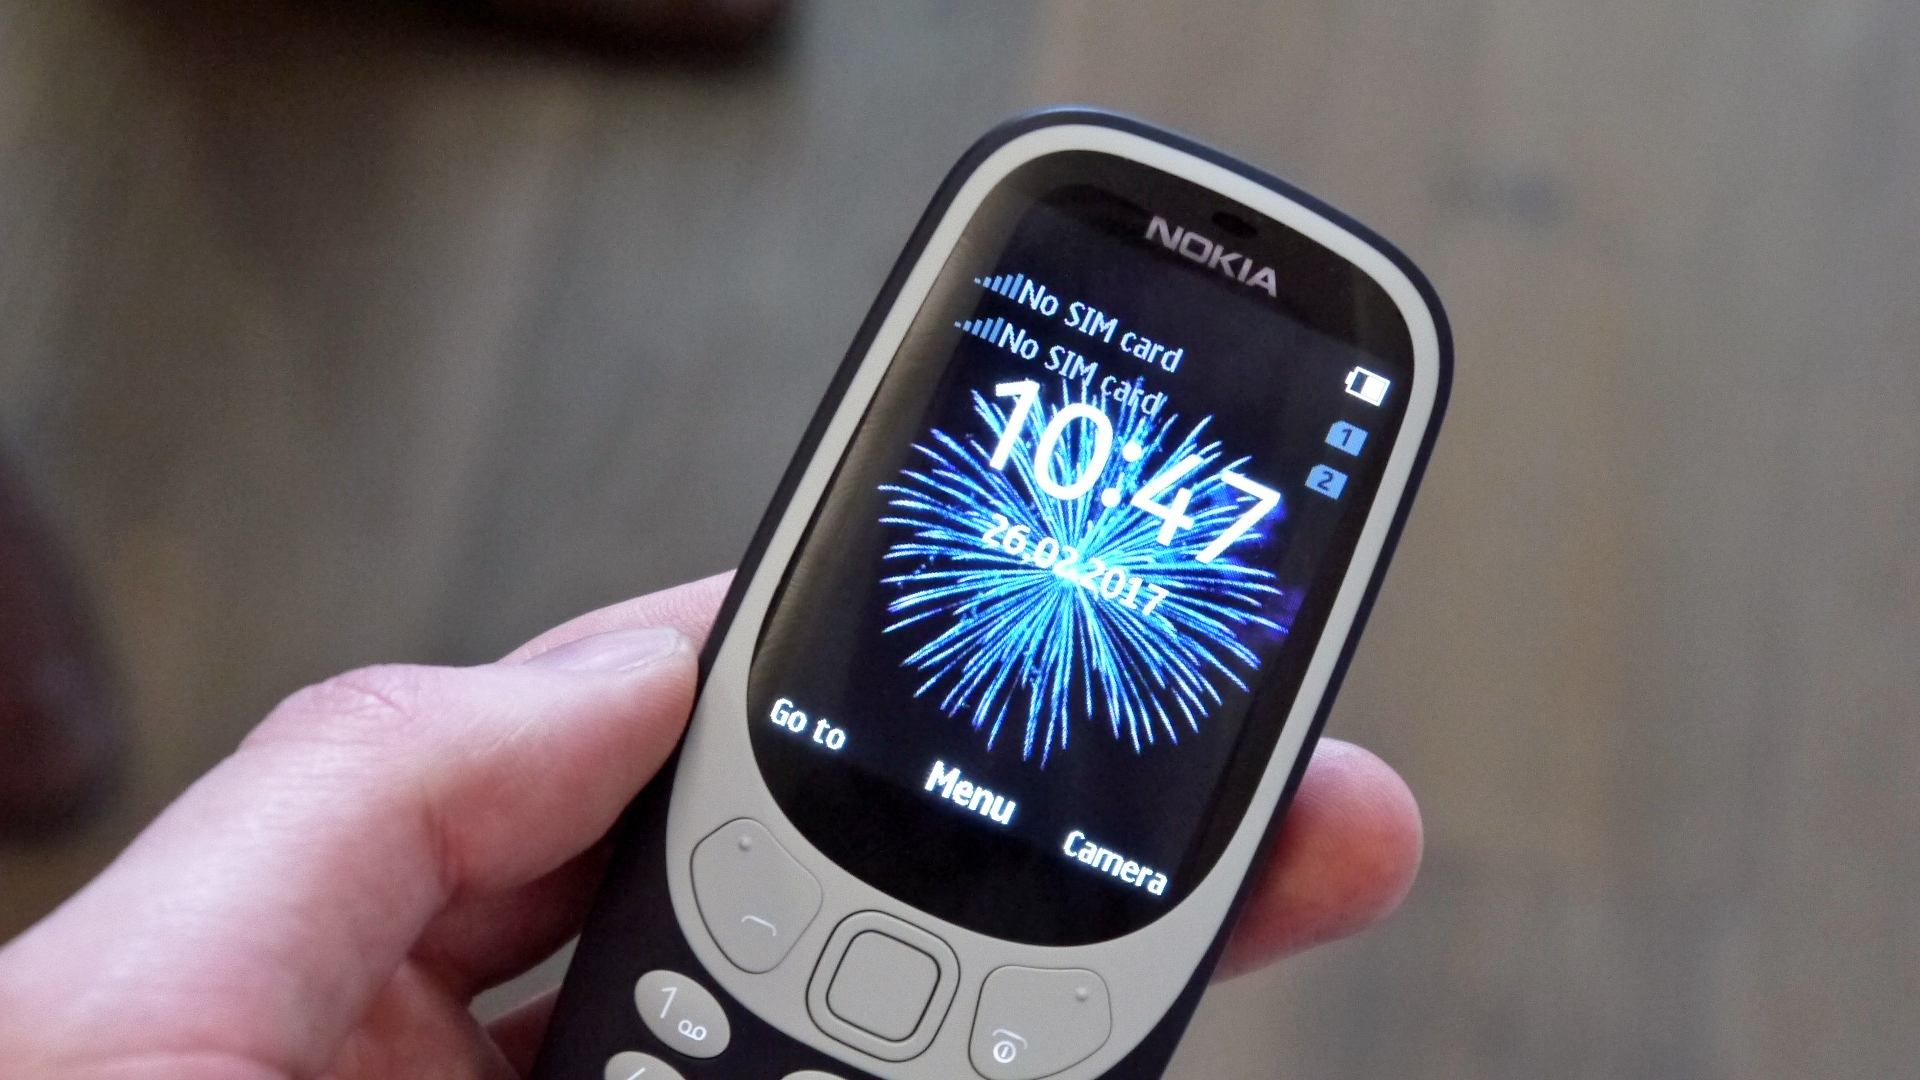 New Nokia 3310 Won't Work in US, Canada, Australia. This Is Why